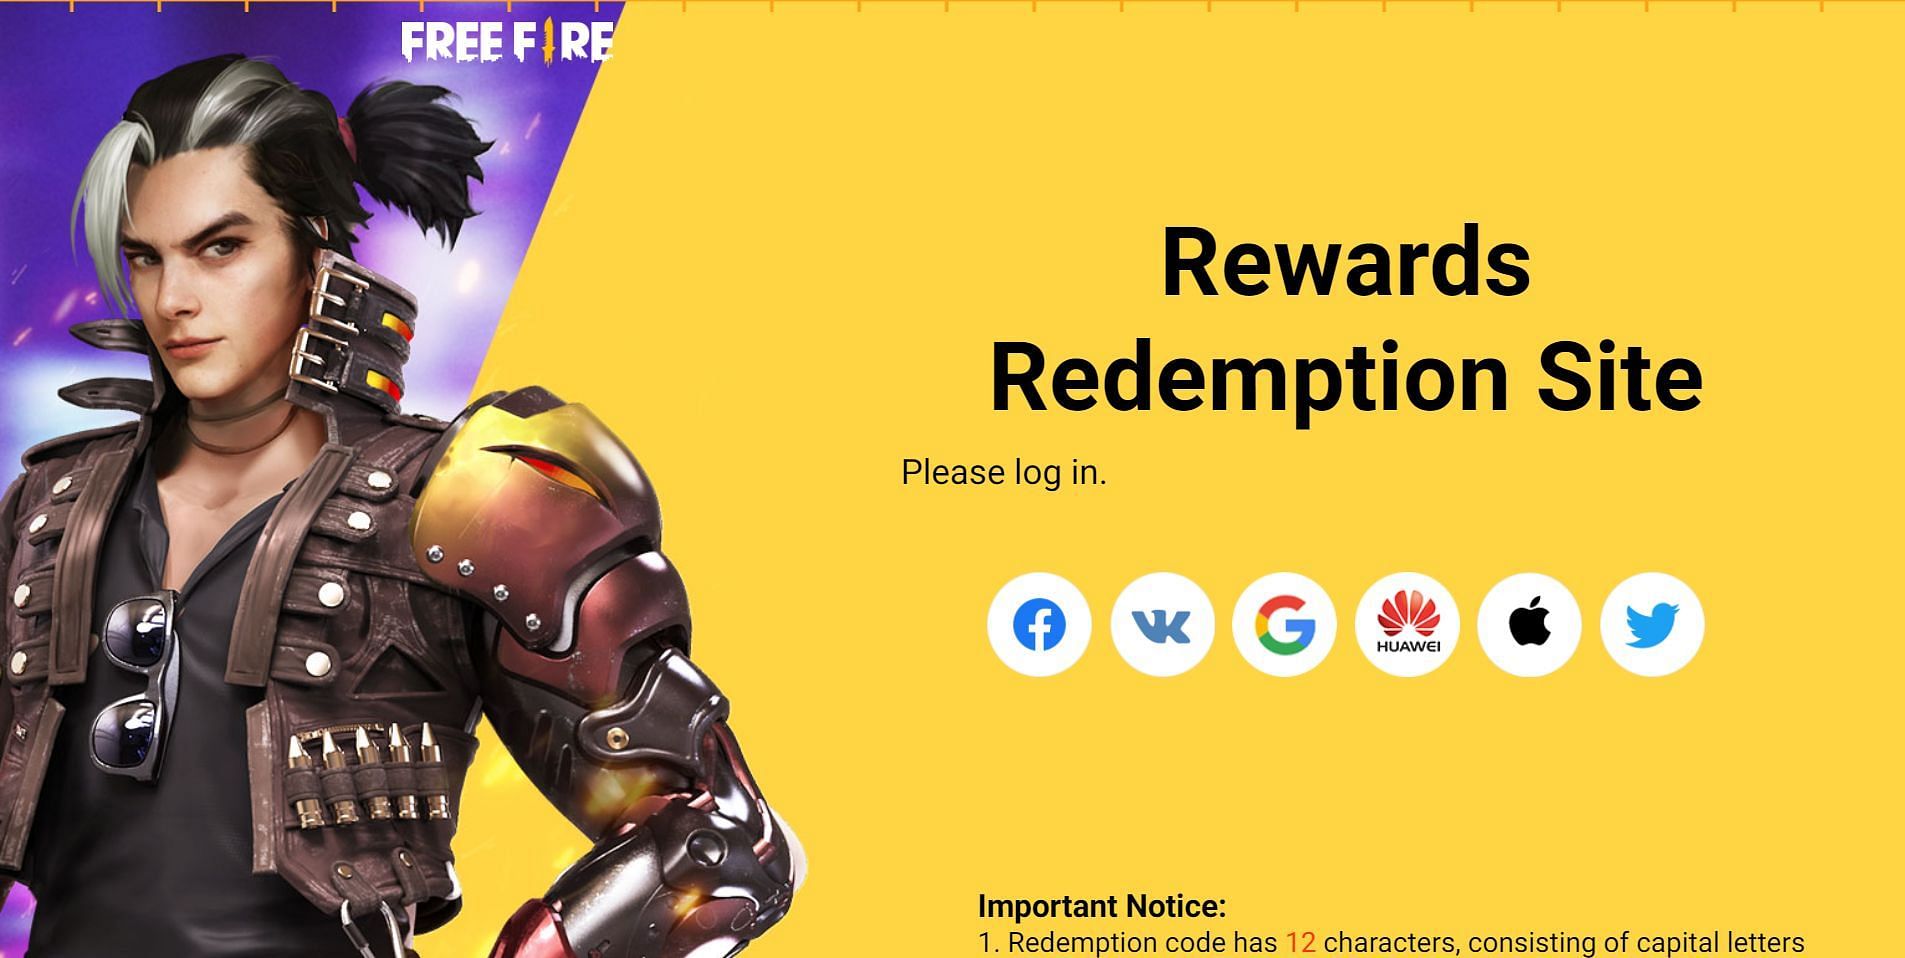 Rewards Redemption Site of the game needs to be used by the players (Image via Free Fire)